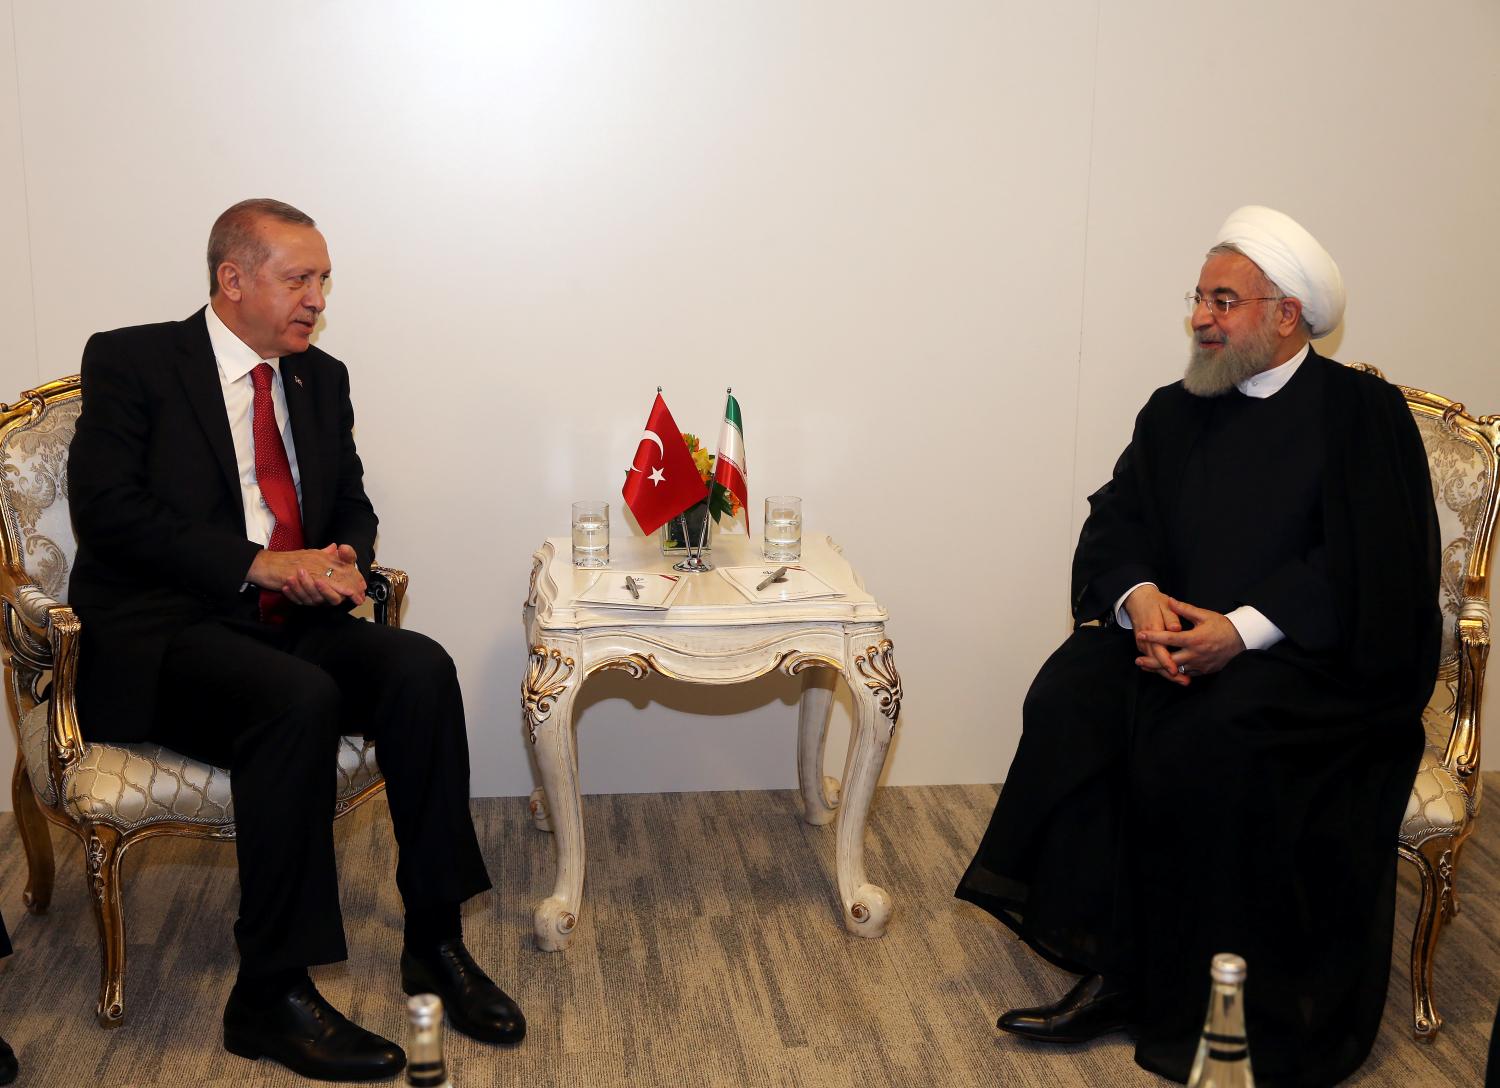 Turkish President Tayyip Erdogan meets with Iranian counterpart Hassan Rouhani during an extraordinary meeting of the Organisation of Islamic Cooperation (OIC) in Istanbul, Turkey May 18, 2018. Cem Oksuz/Pool via Reuters -